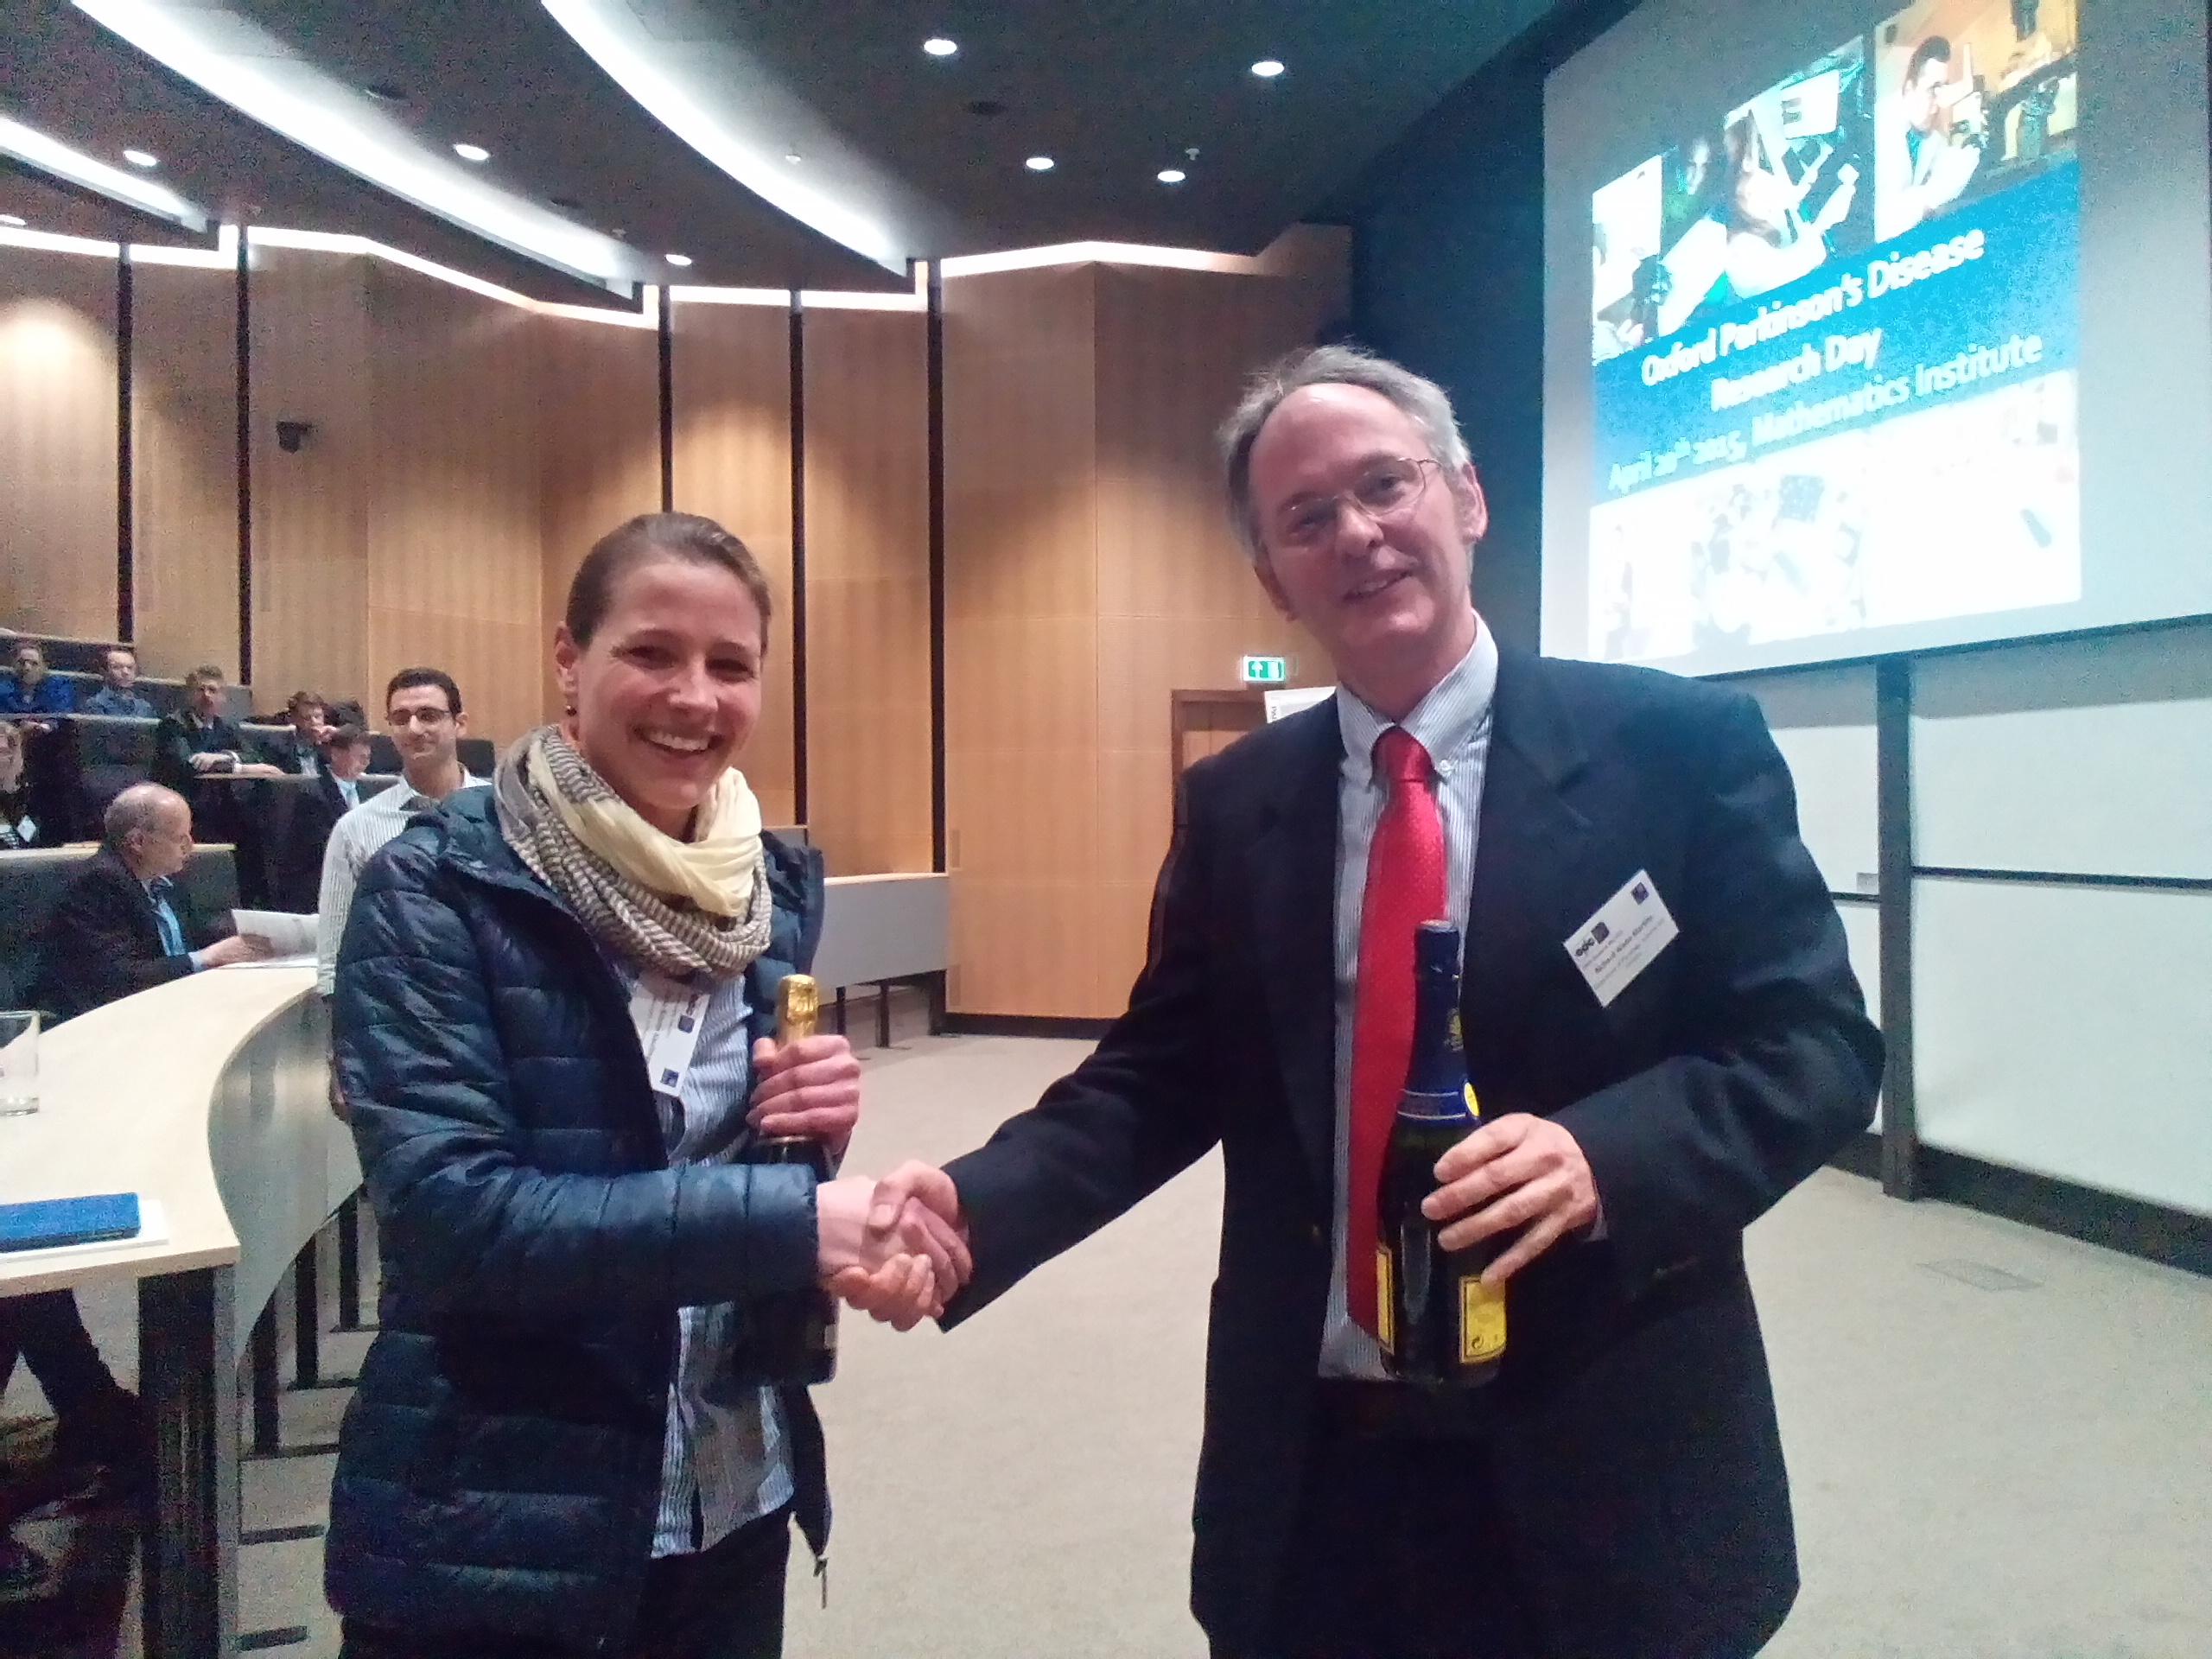 Anna-Kristin Kaufmann receives the poster prize from Richard Wade-Martins, who leads the Oxford Parkinson's Disease Centre. 